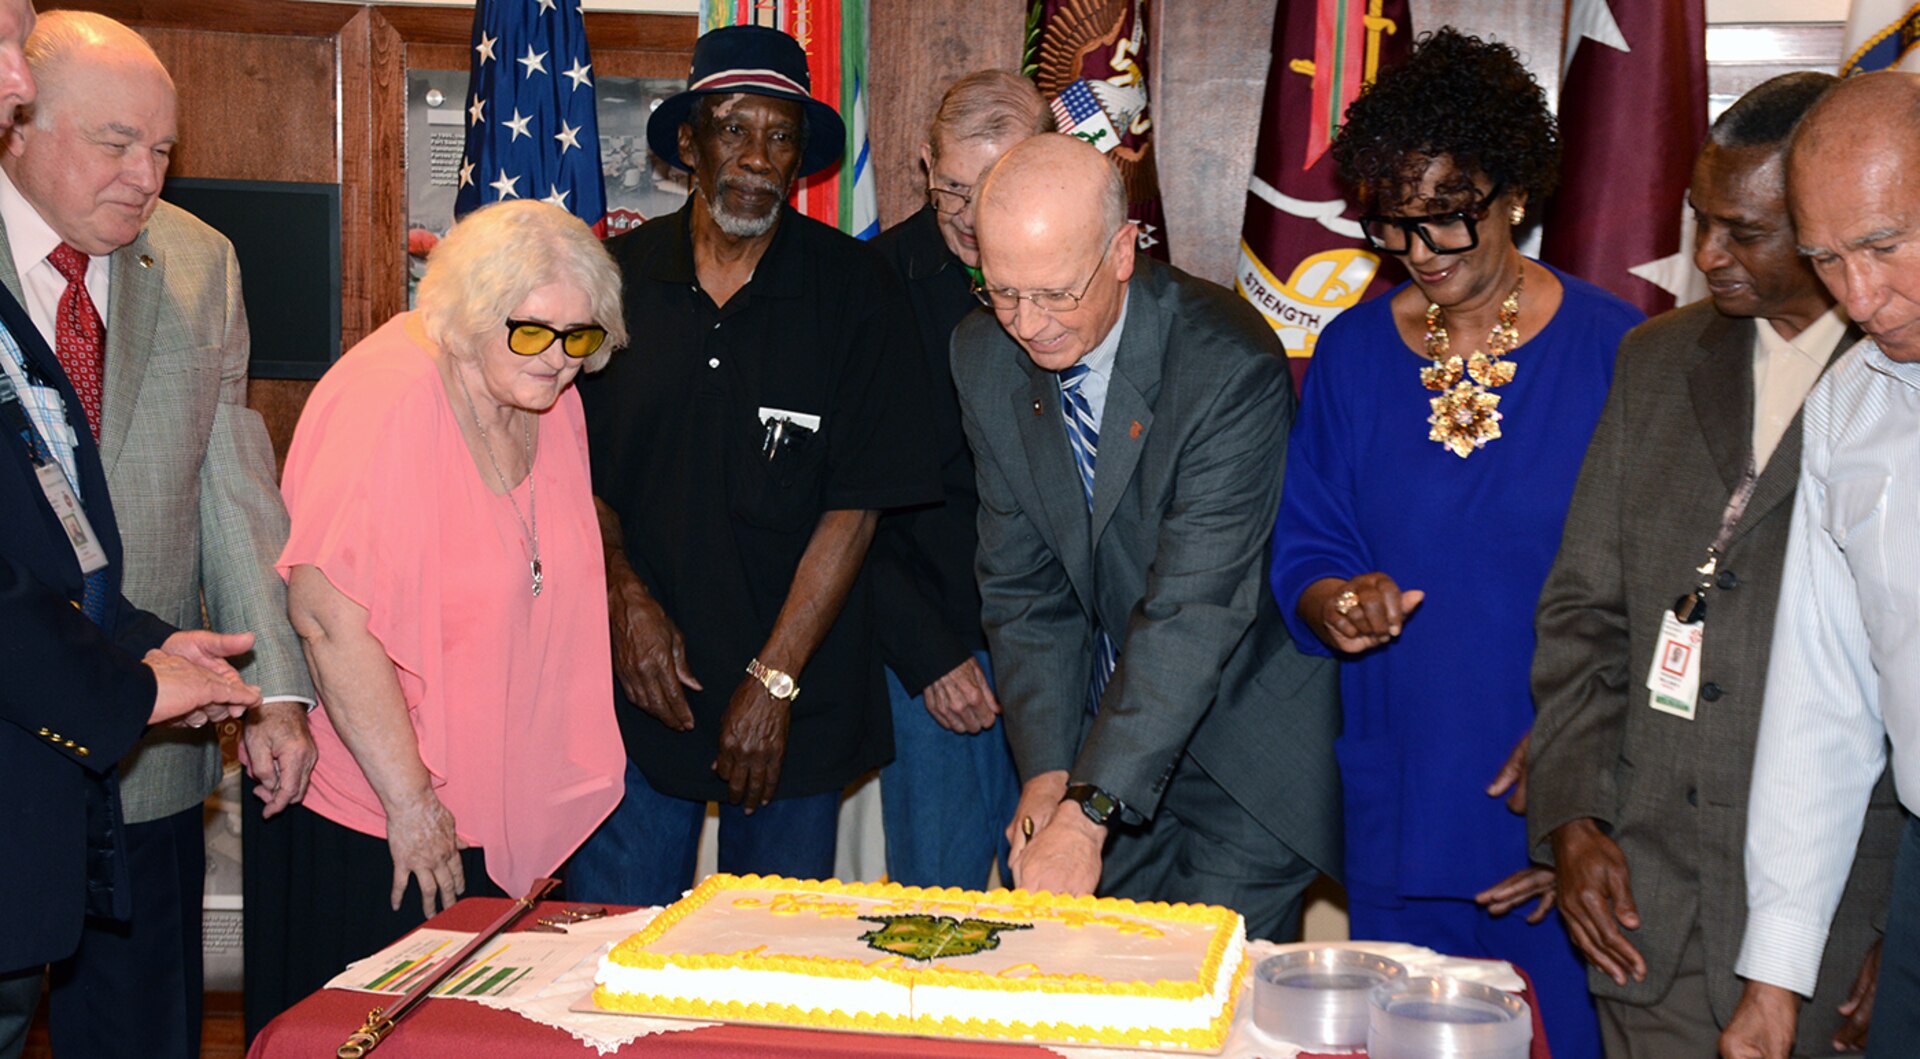 Mr. Charles G. (Gregg) Stevens, SES, Army Medicine Civilian Corps Chief, along with some of the longest serving members of the Civilian Corps, cut a cake celebrating the 21st anniversary of the corps. The Army Medical Department Civilian Corps was established on March 26, 1996.